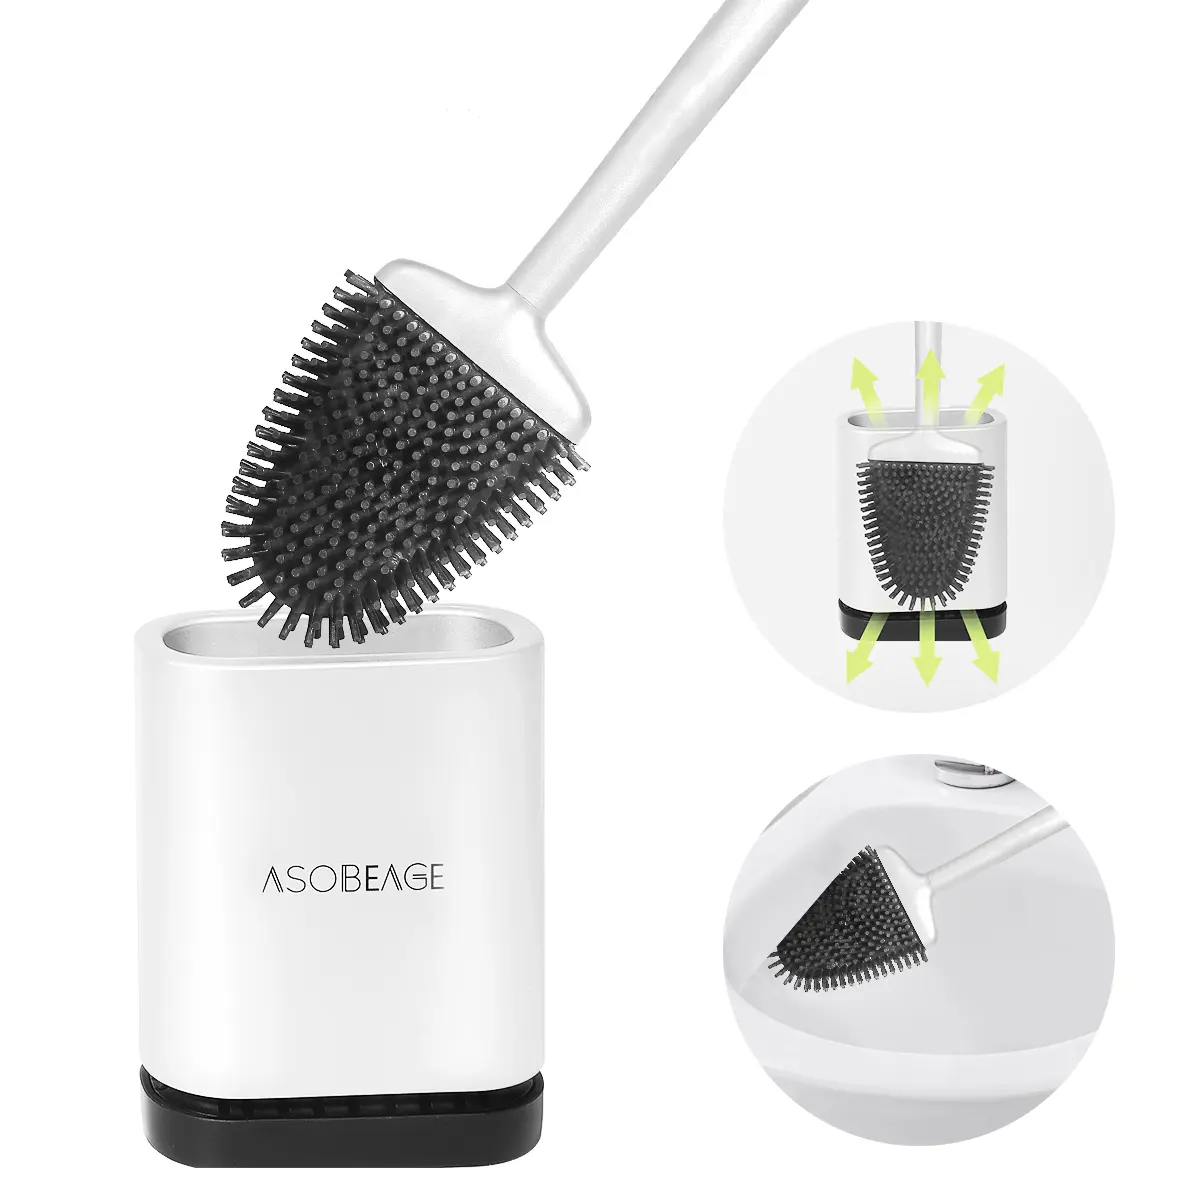 ASOBEAGE Toilet Brush,Deep Cleaner Silicone Toilet Brushes with No-Slip Long Plastic Handle and Flexible Bristles